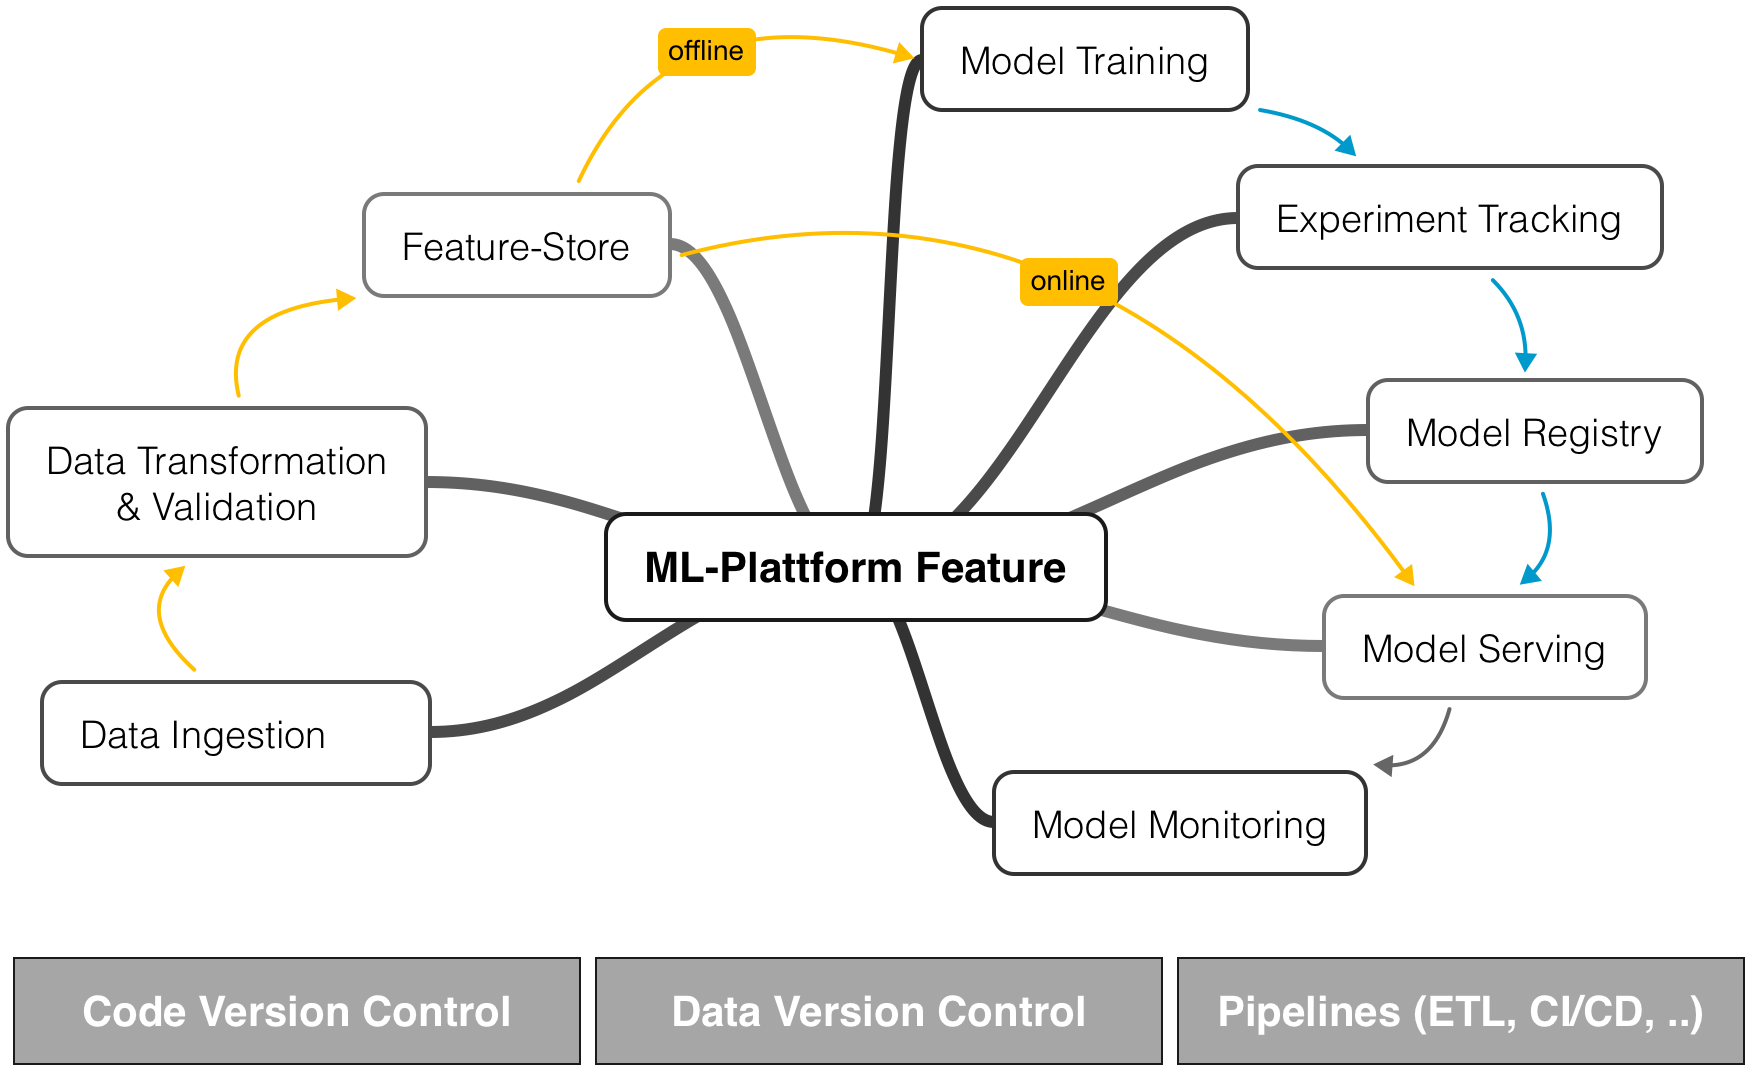 Features and Components of a ML plattform